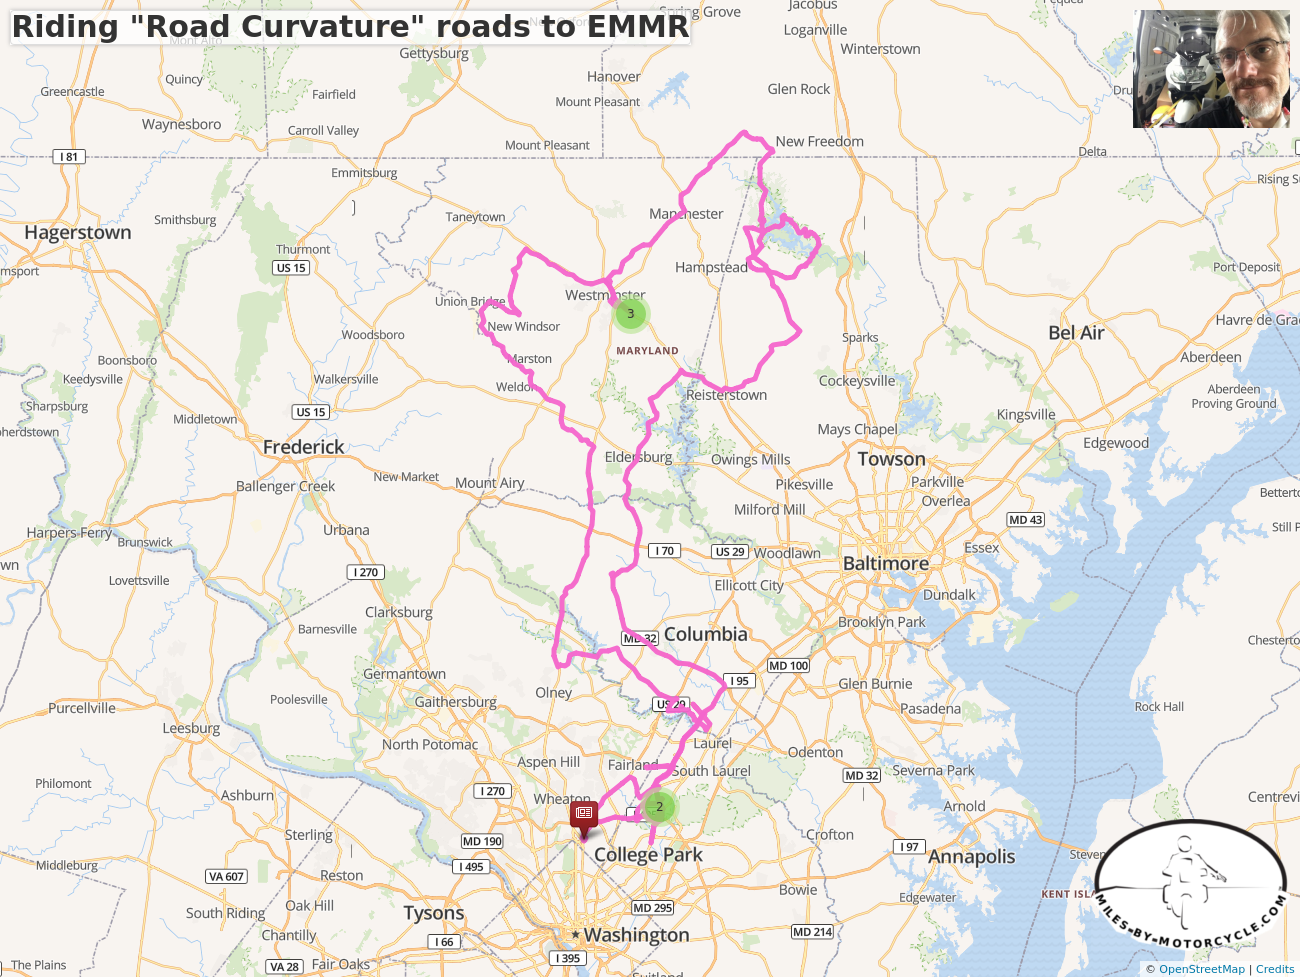 Riding "Road Curvature" roads to EMMR